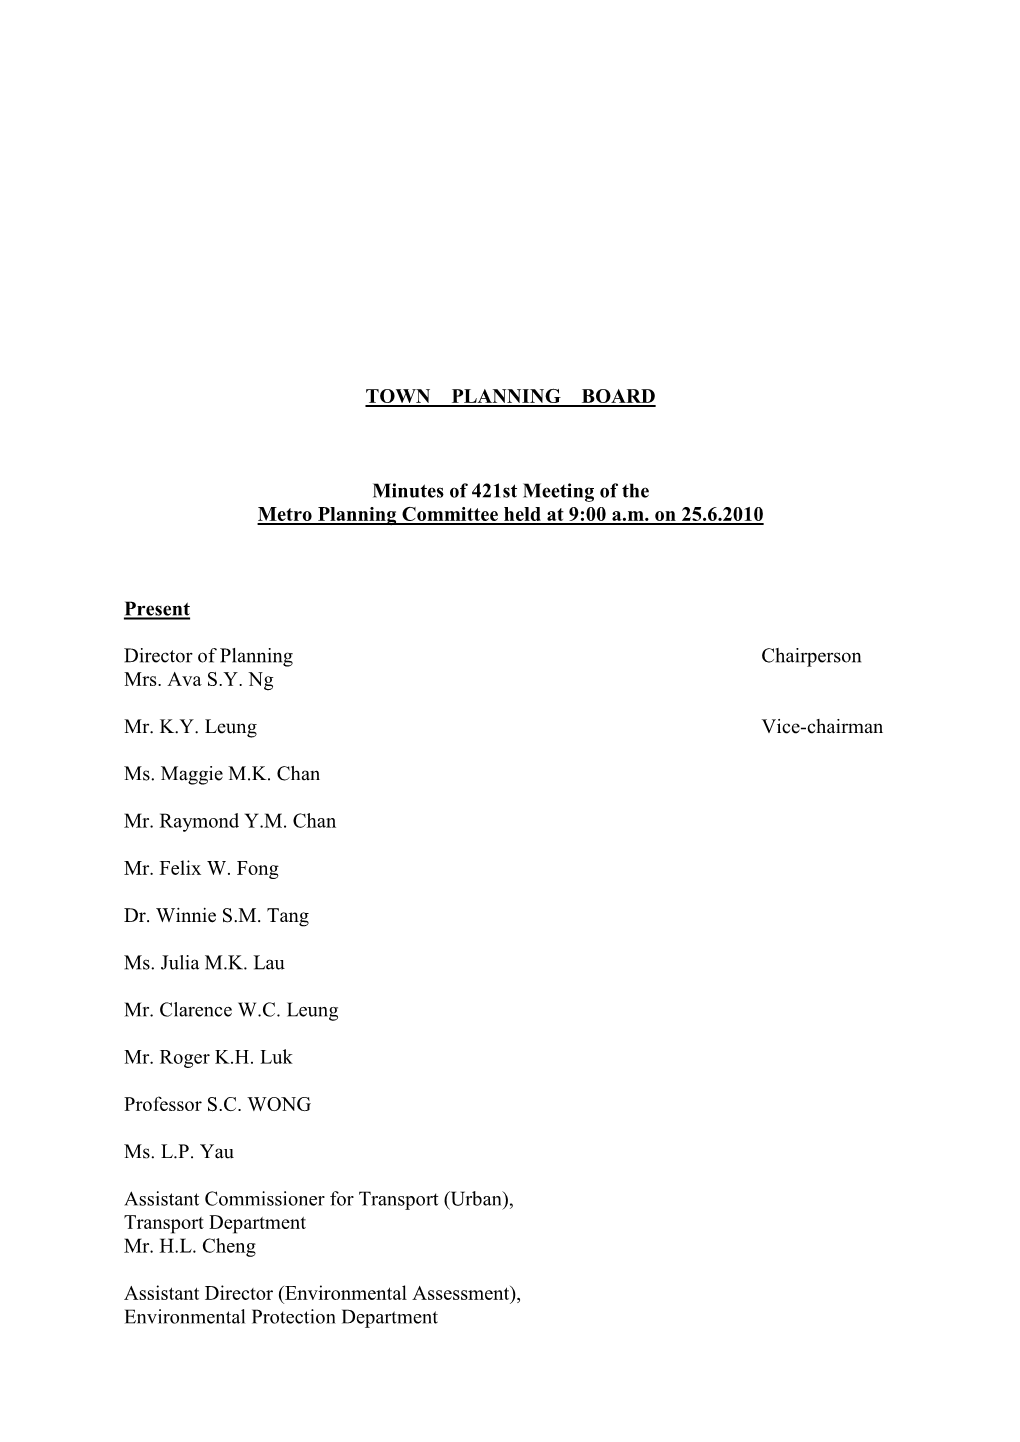 TOWN PLANNING BOARD Minutes of 421St Meeting of the Metro